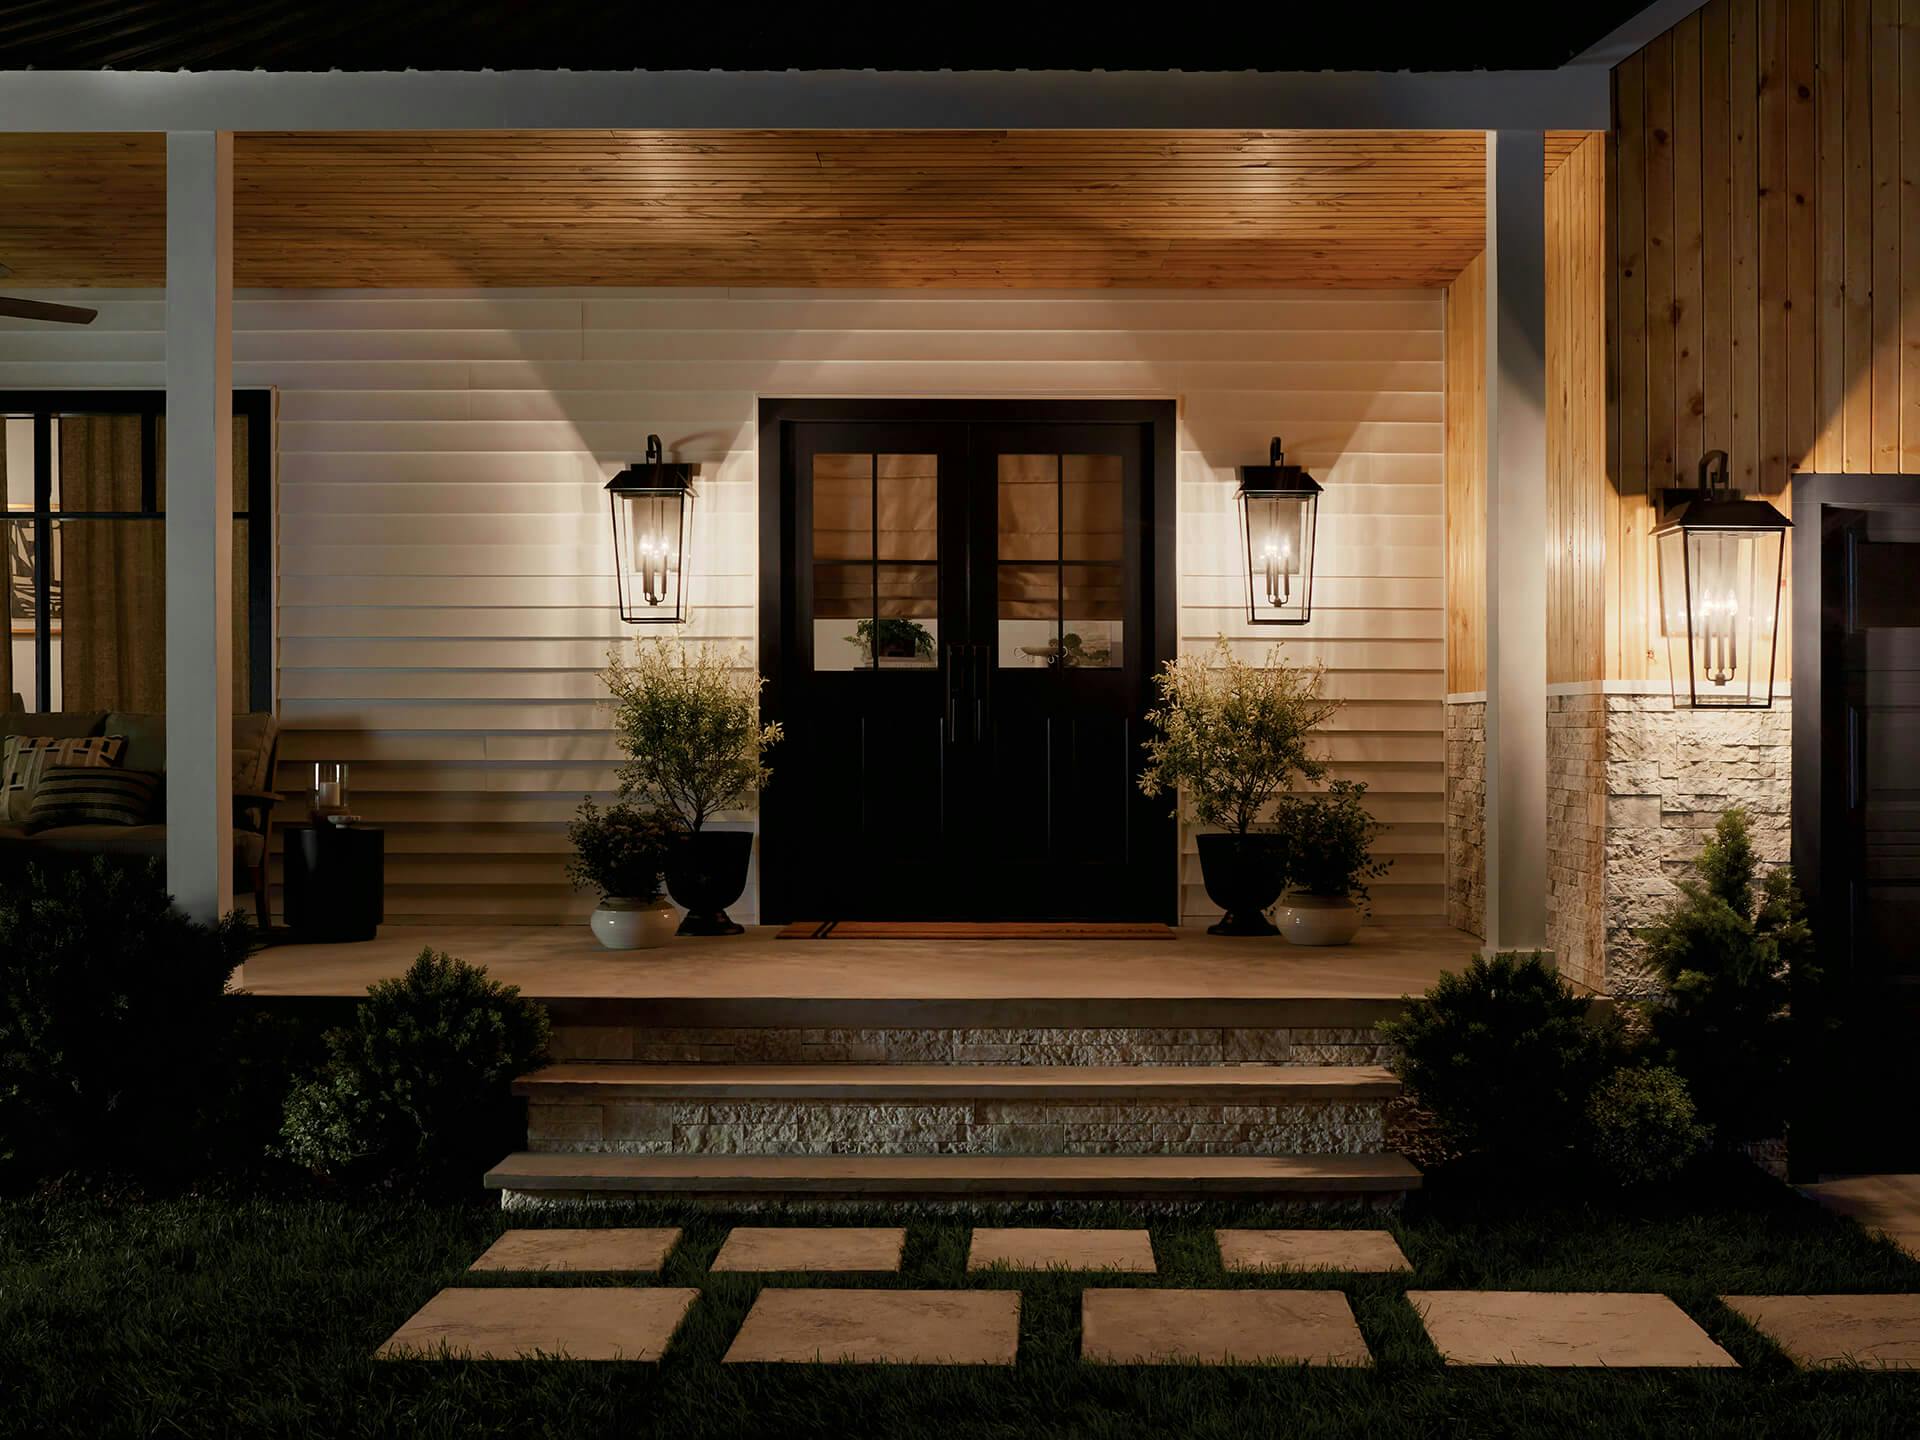 Front porch at dusk lit up by three Mathus sconces, one by the garage and two on each side of the door